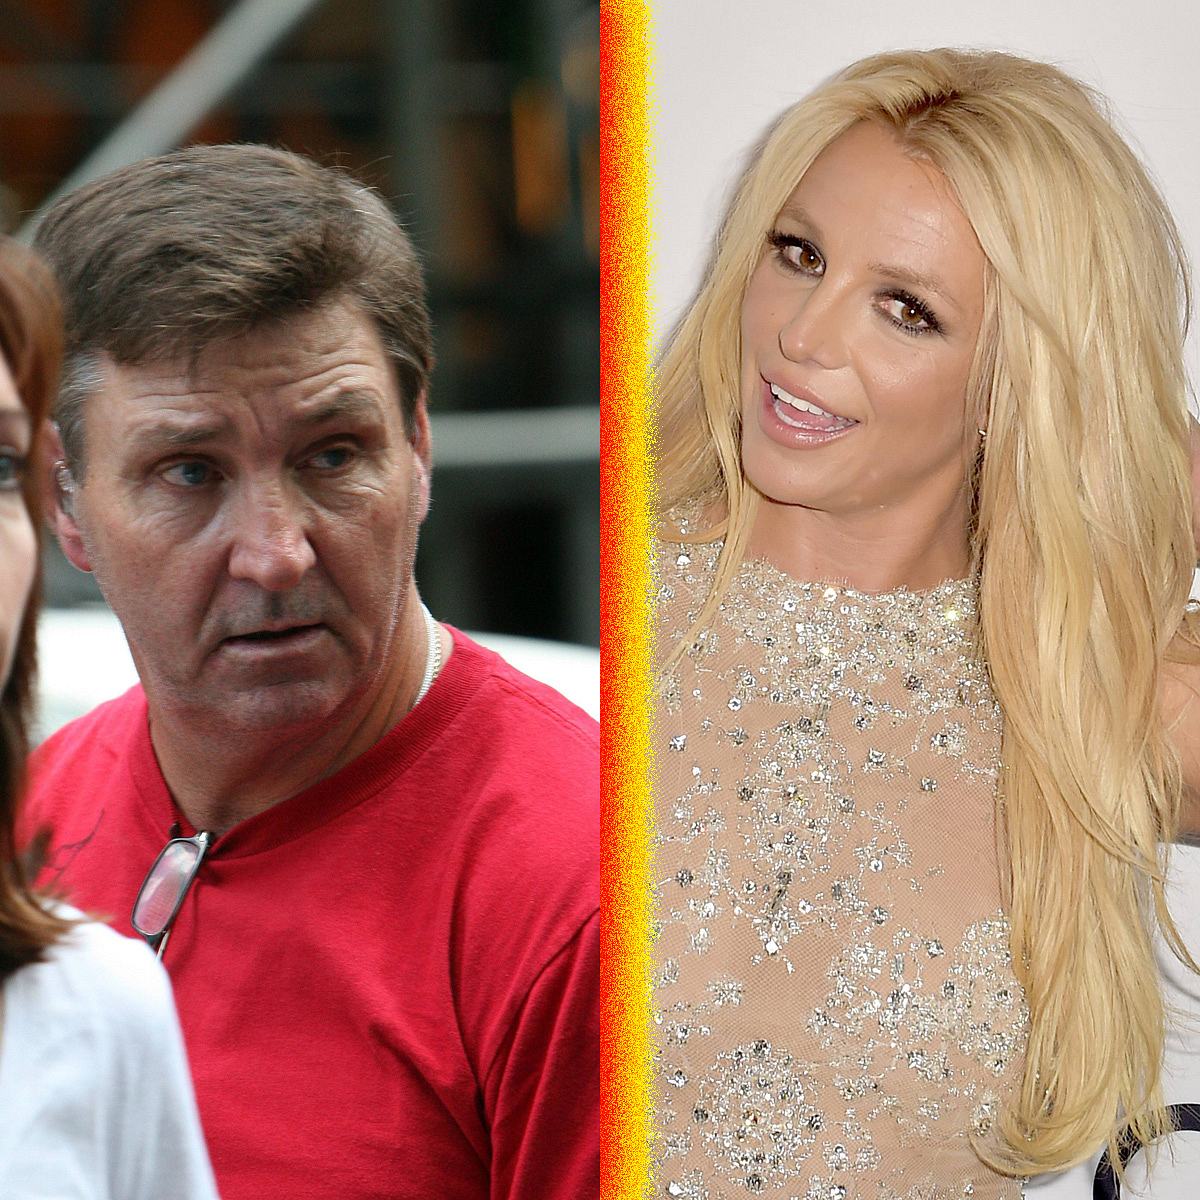 Familien-Zoff: Britney Spears ghosted Familie